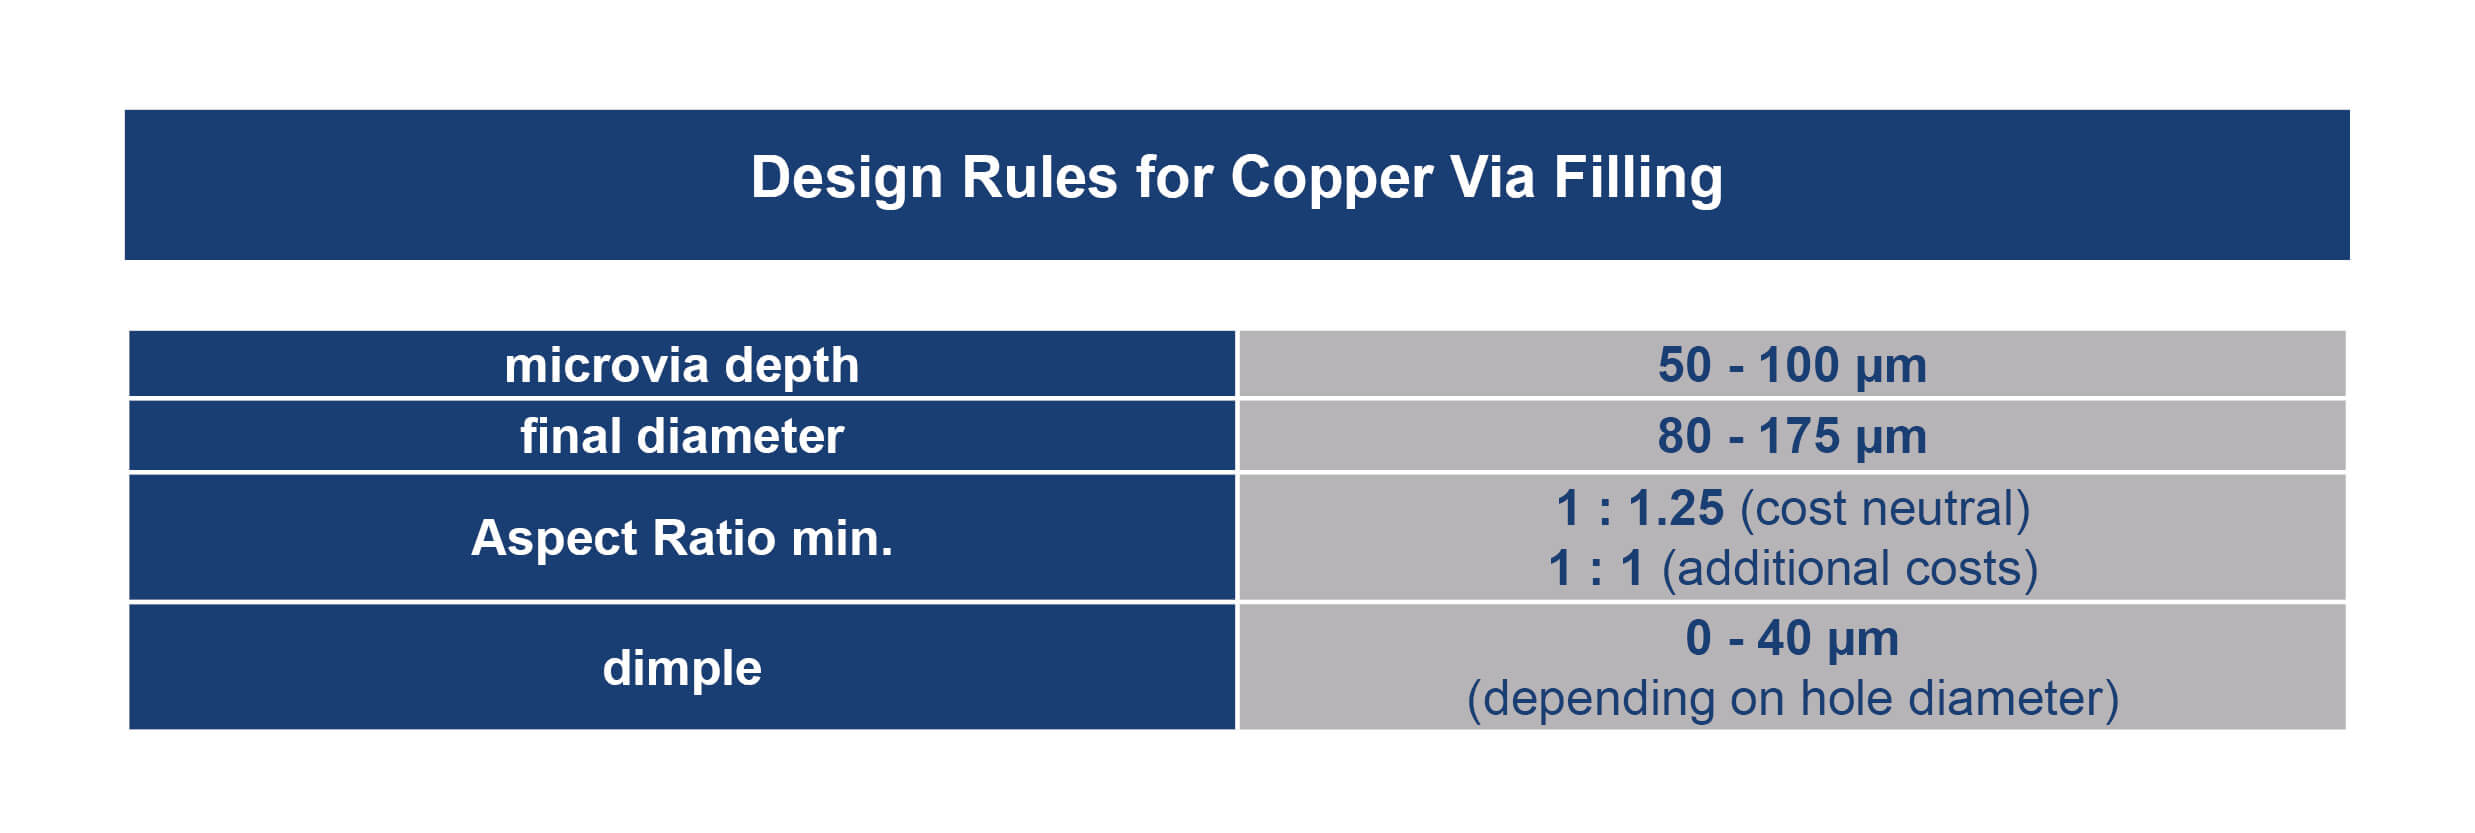 Unimicron HDI Technology Copper Filling Design Rules